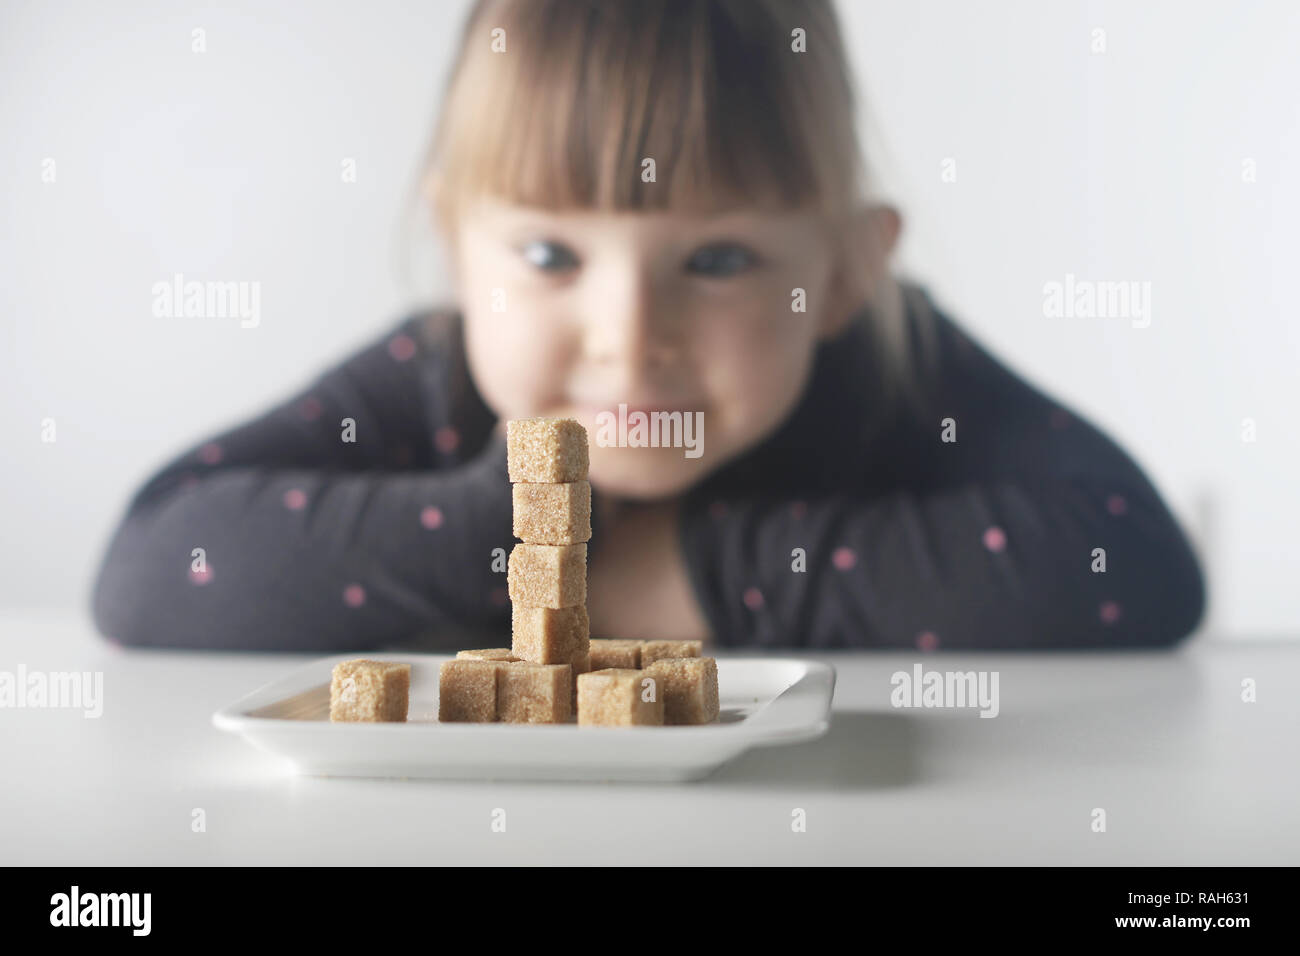 Child, sugar cubes. The problem of excessive consumption of sugar by children under the age of 10 years. Stock Photo